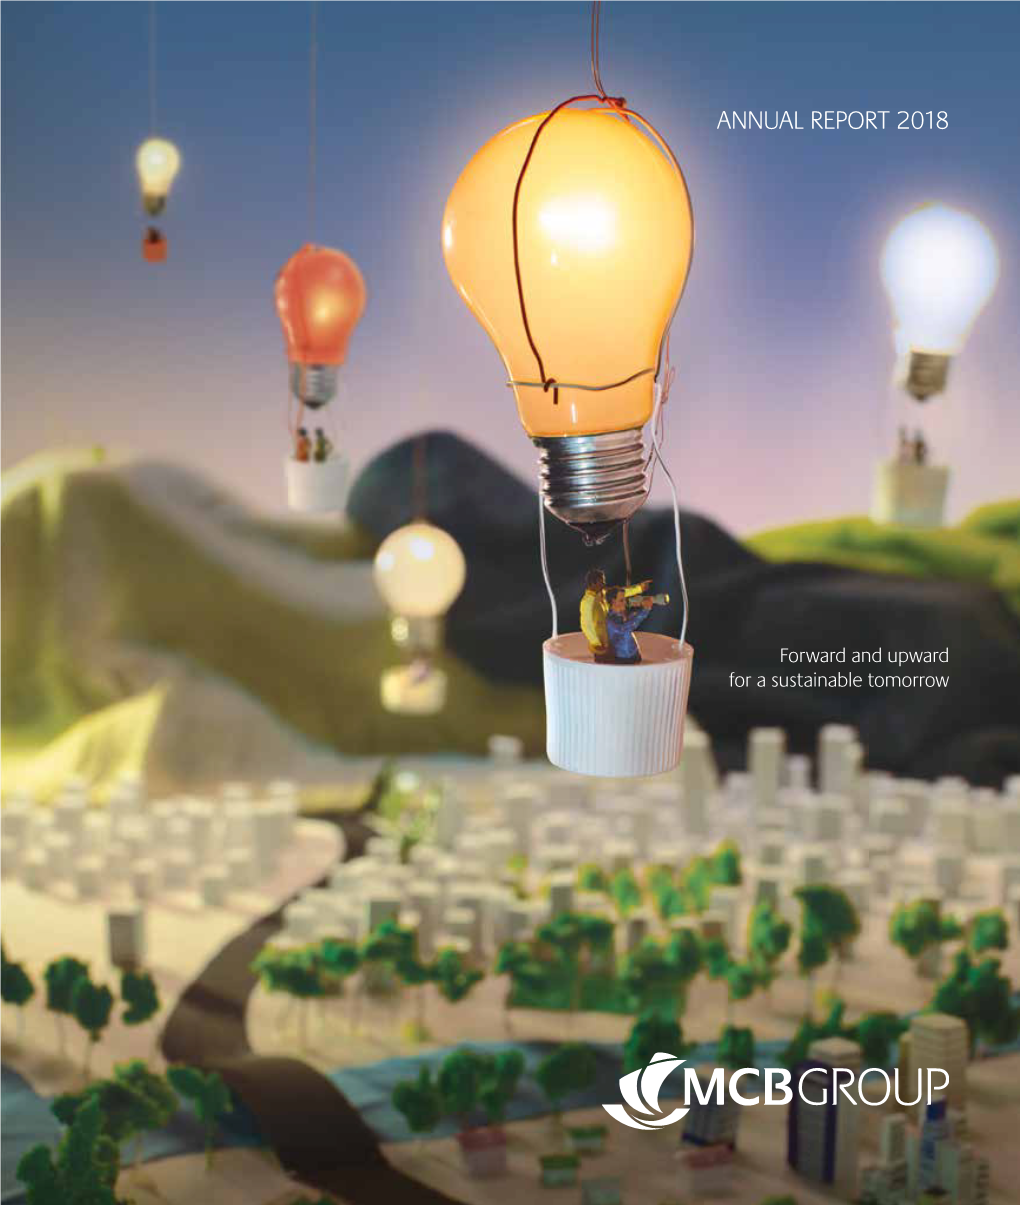 ANNUAL REPORT 2018 MCB GROUP Annual Report 2018 Report Annual